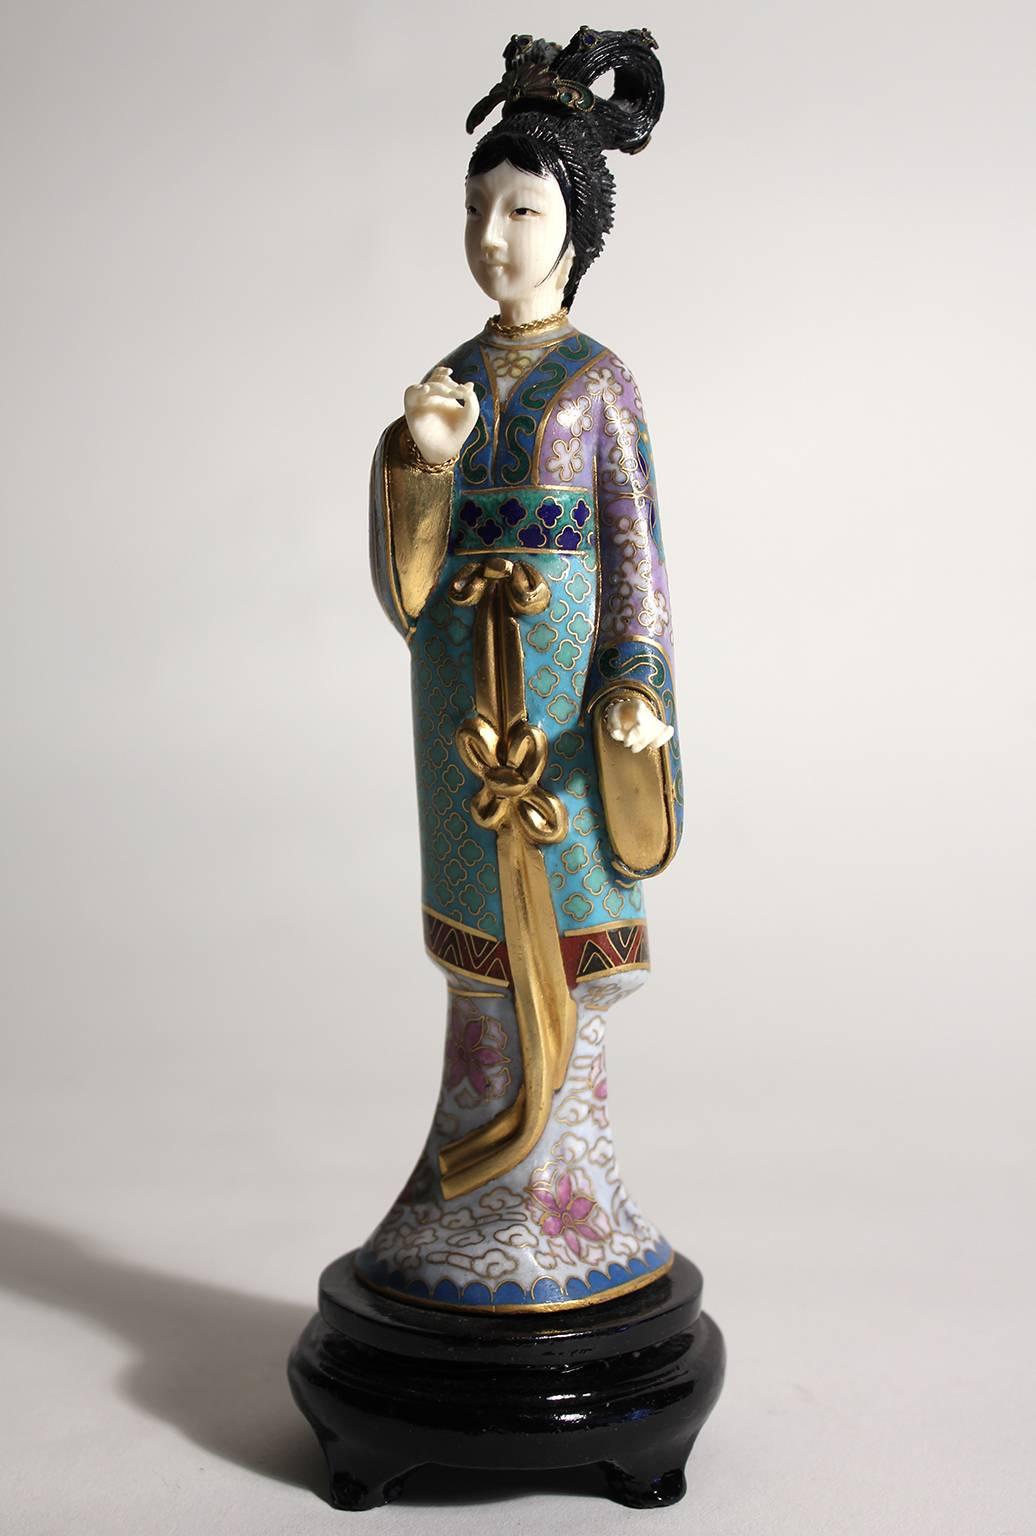 Stunning Chinese Guanyin cloisonné enameled figurine/sculpture. Comes with the original wood stand. Hands and head are carved. Stunning color and details are second to none. Measures: 8 1/2